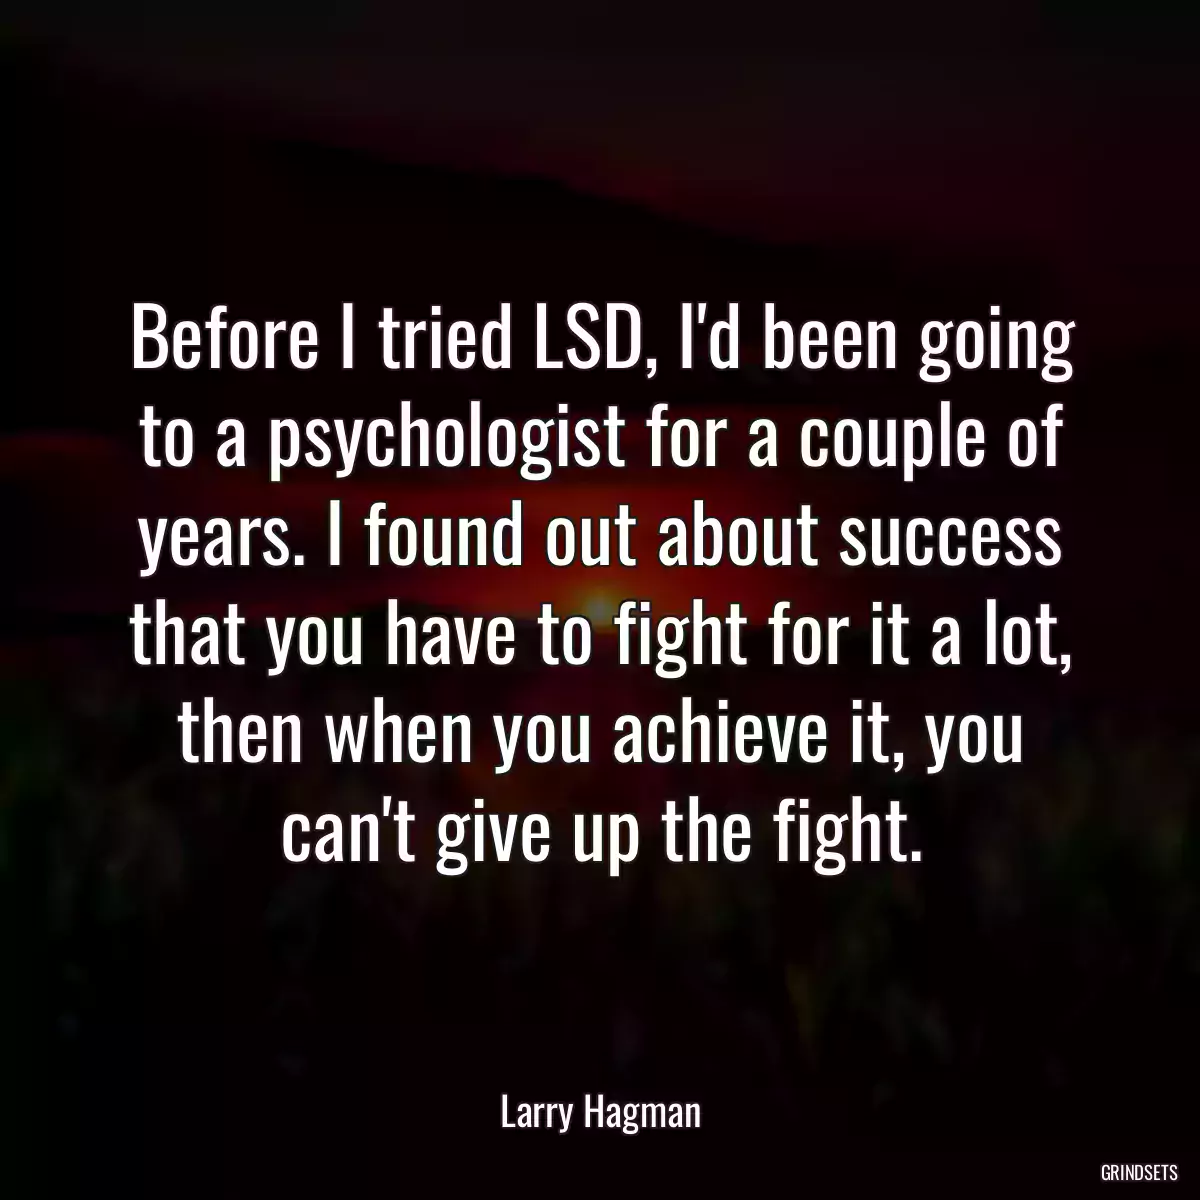 Before I tried LSD, I\'d been going to a psychologist for a couple of years. I found out about success that you have to fight for it a lot, then when you achieve it, you can\'t give up the fight.